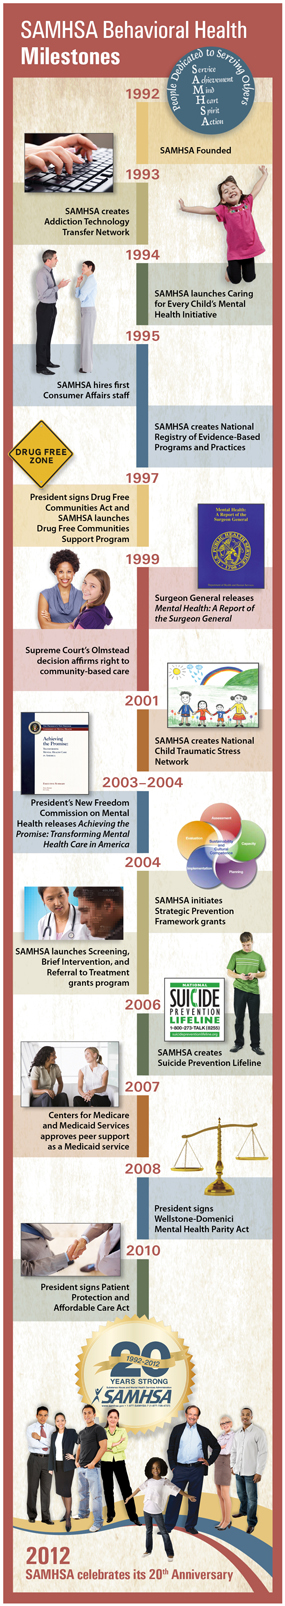 A graphic featuring SAMHSA Behavioral Health Milestones between 1992 and 2012